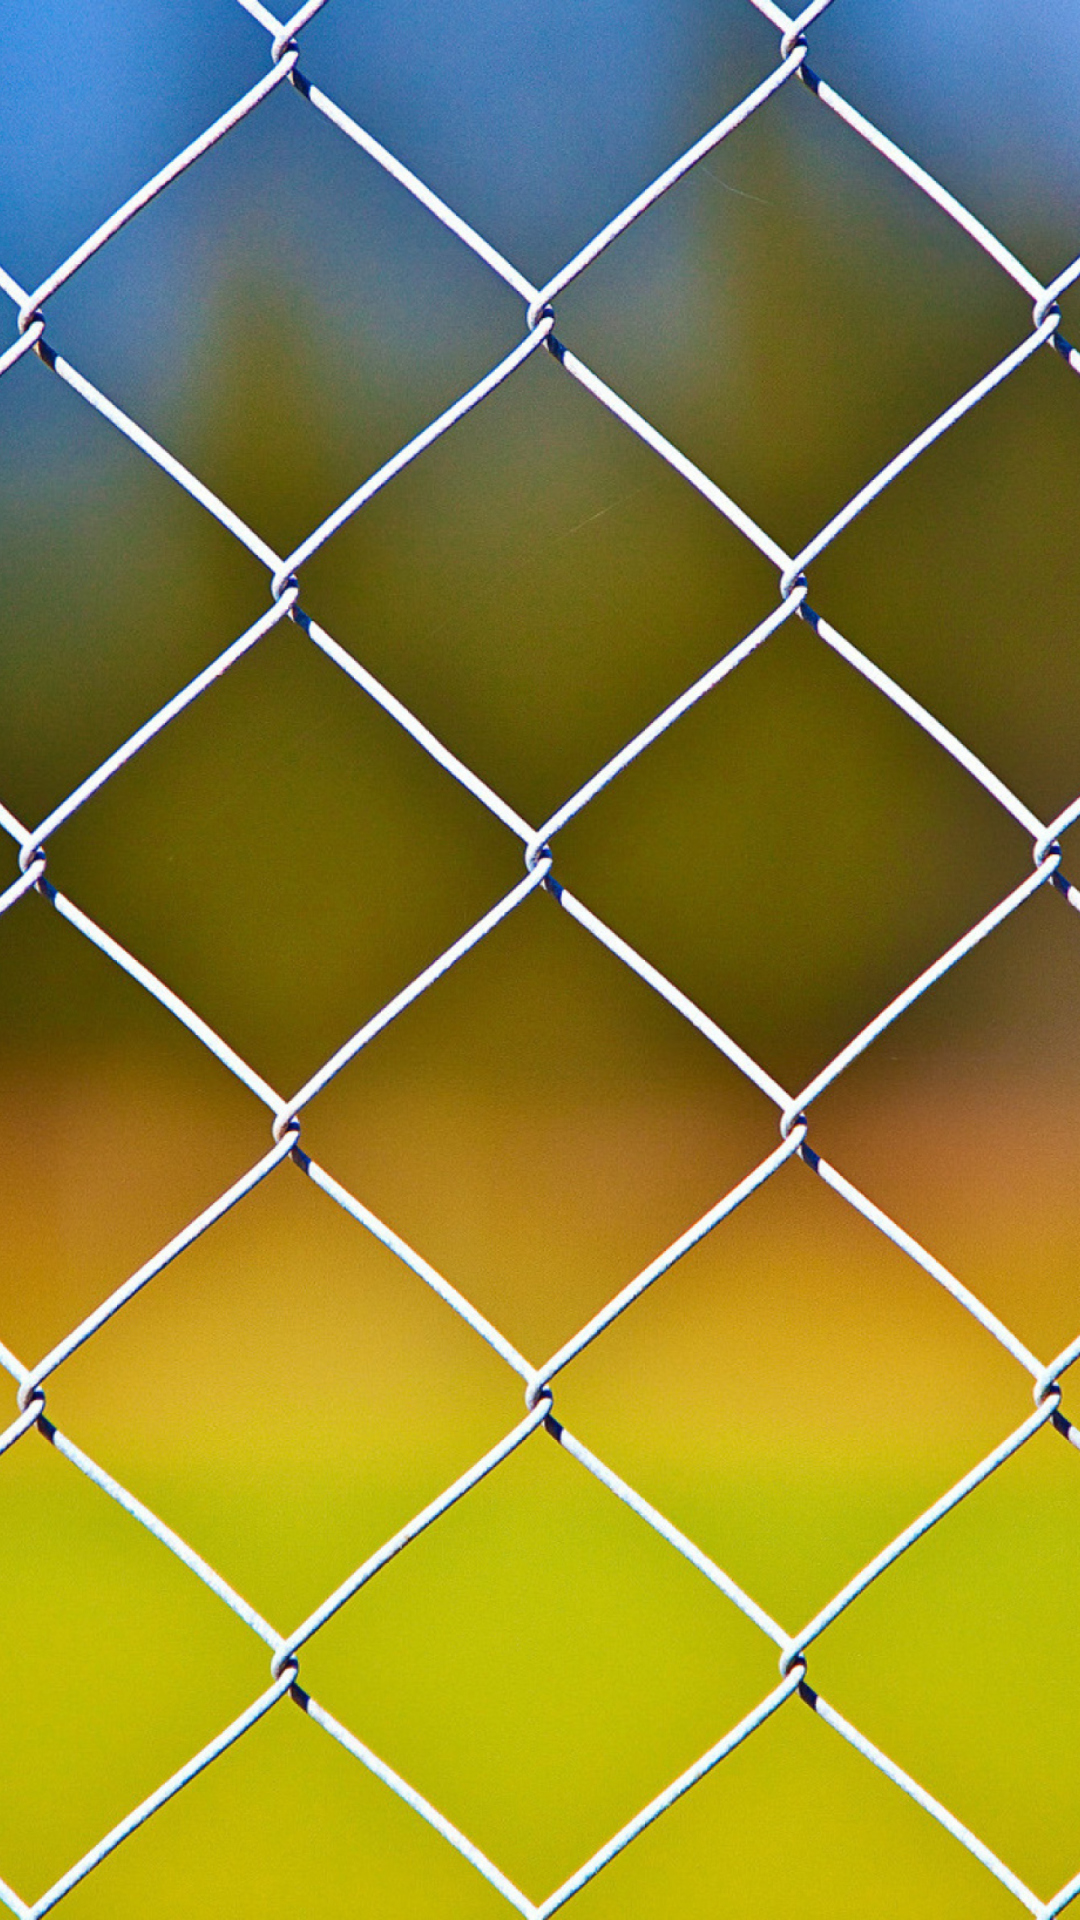 Cage Fence screenshot #1 1080x1920